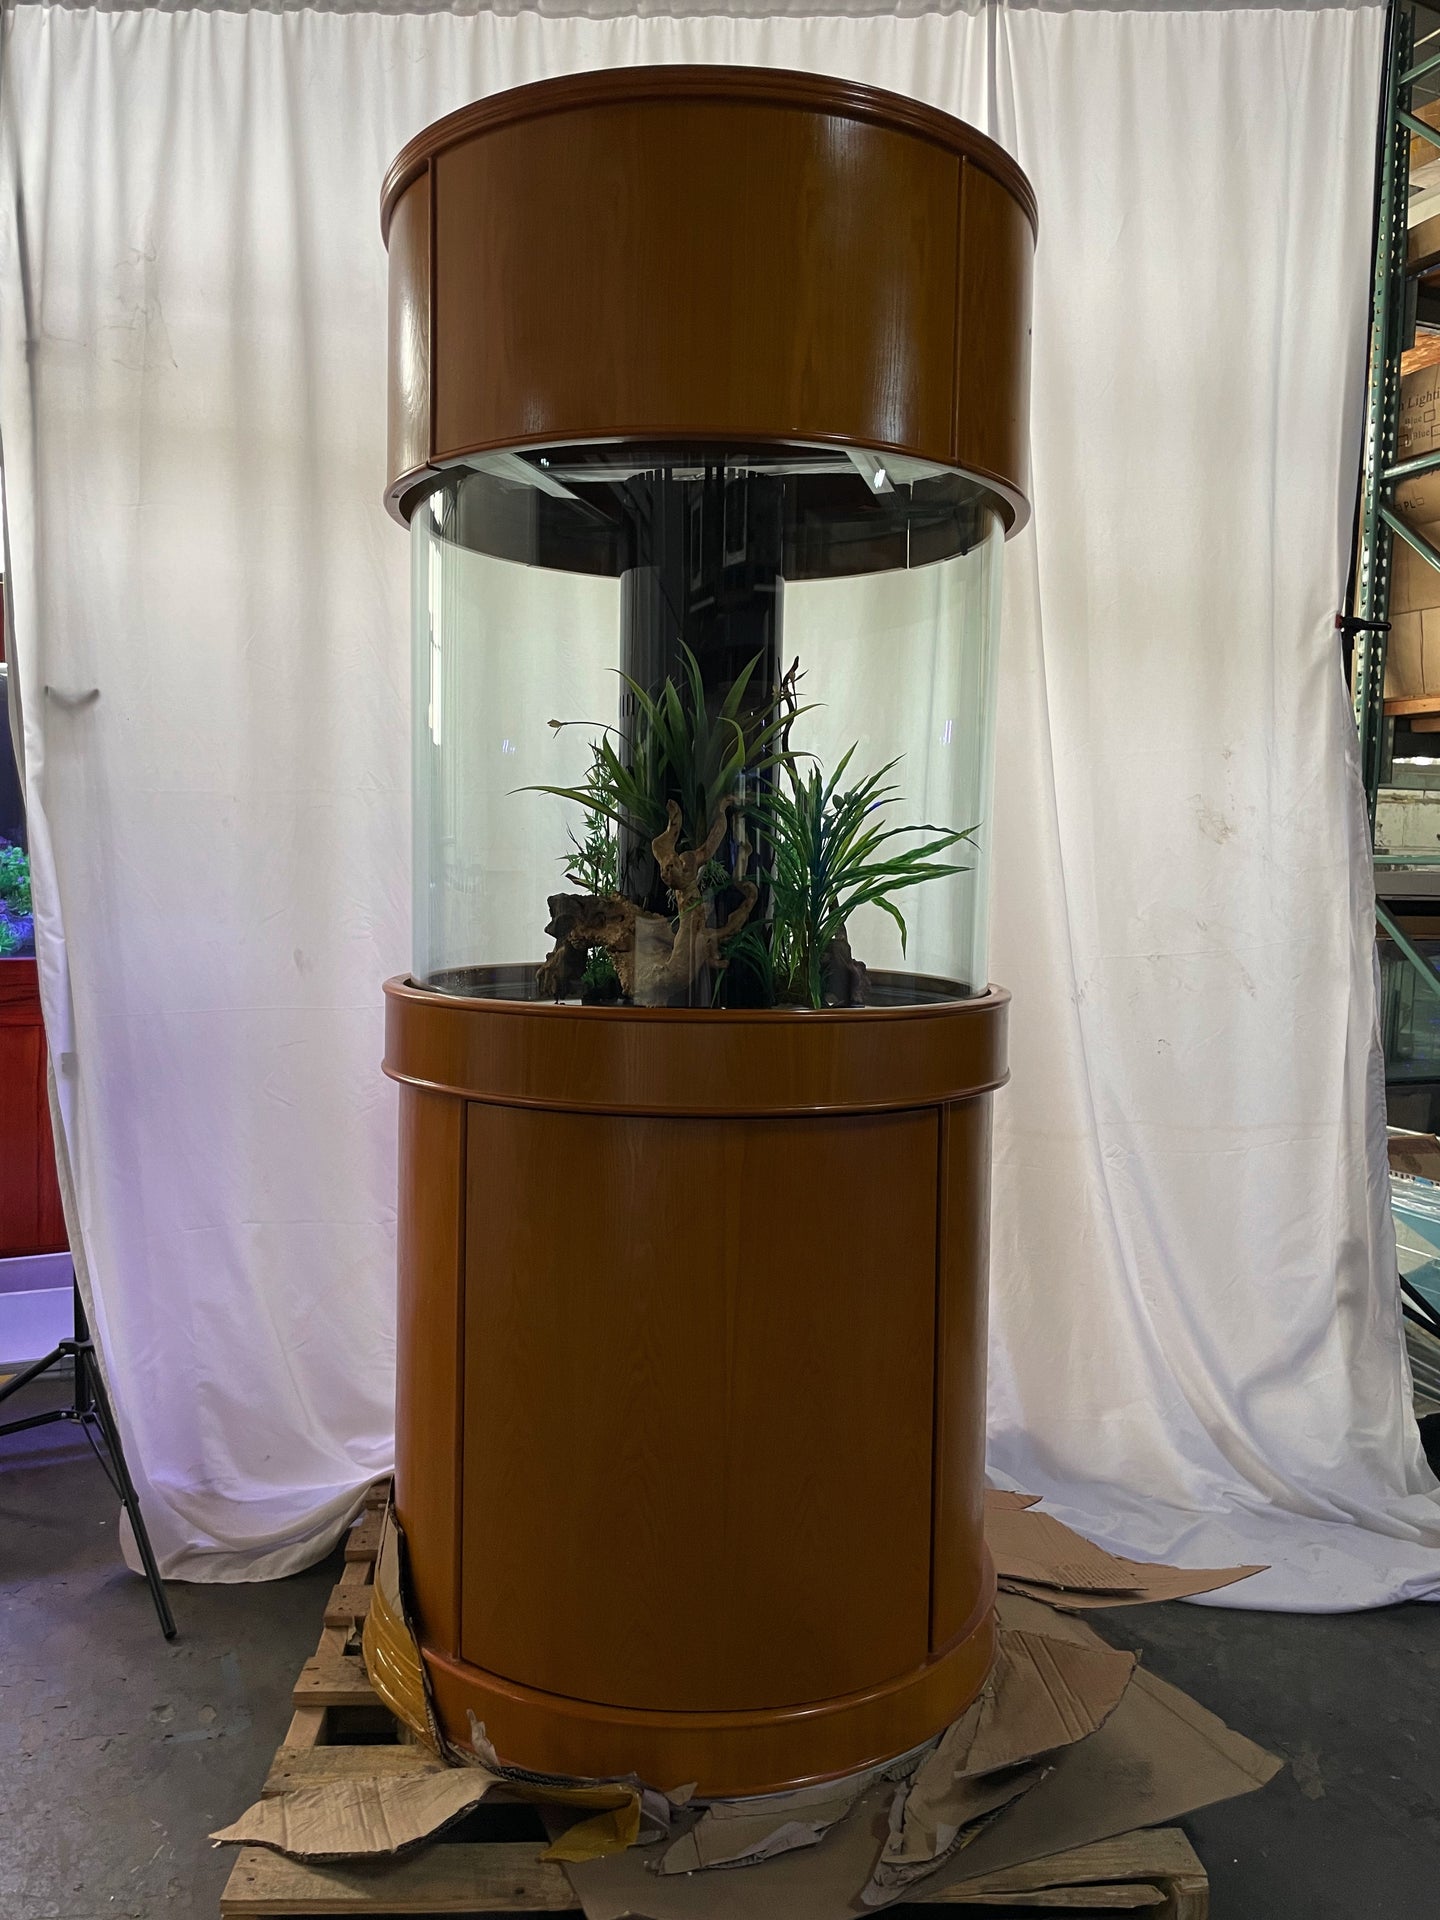 WARRANTY INCLUDED! 100 gallon glass cylinder round aquarium for sale w/ stand and canopy